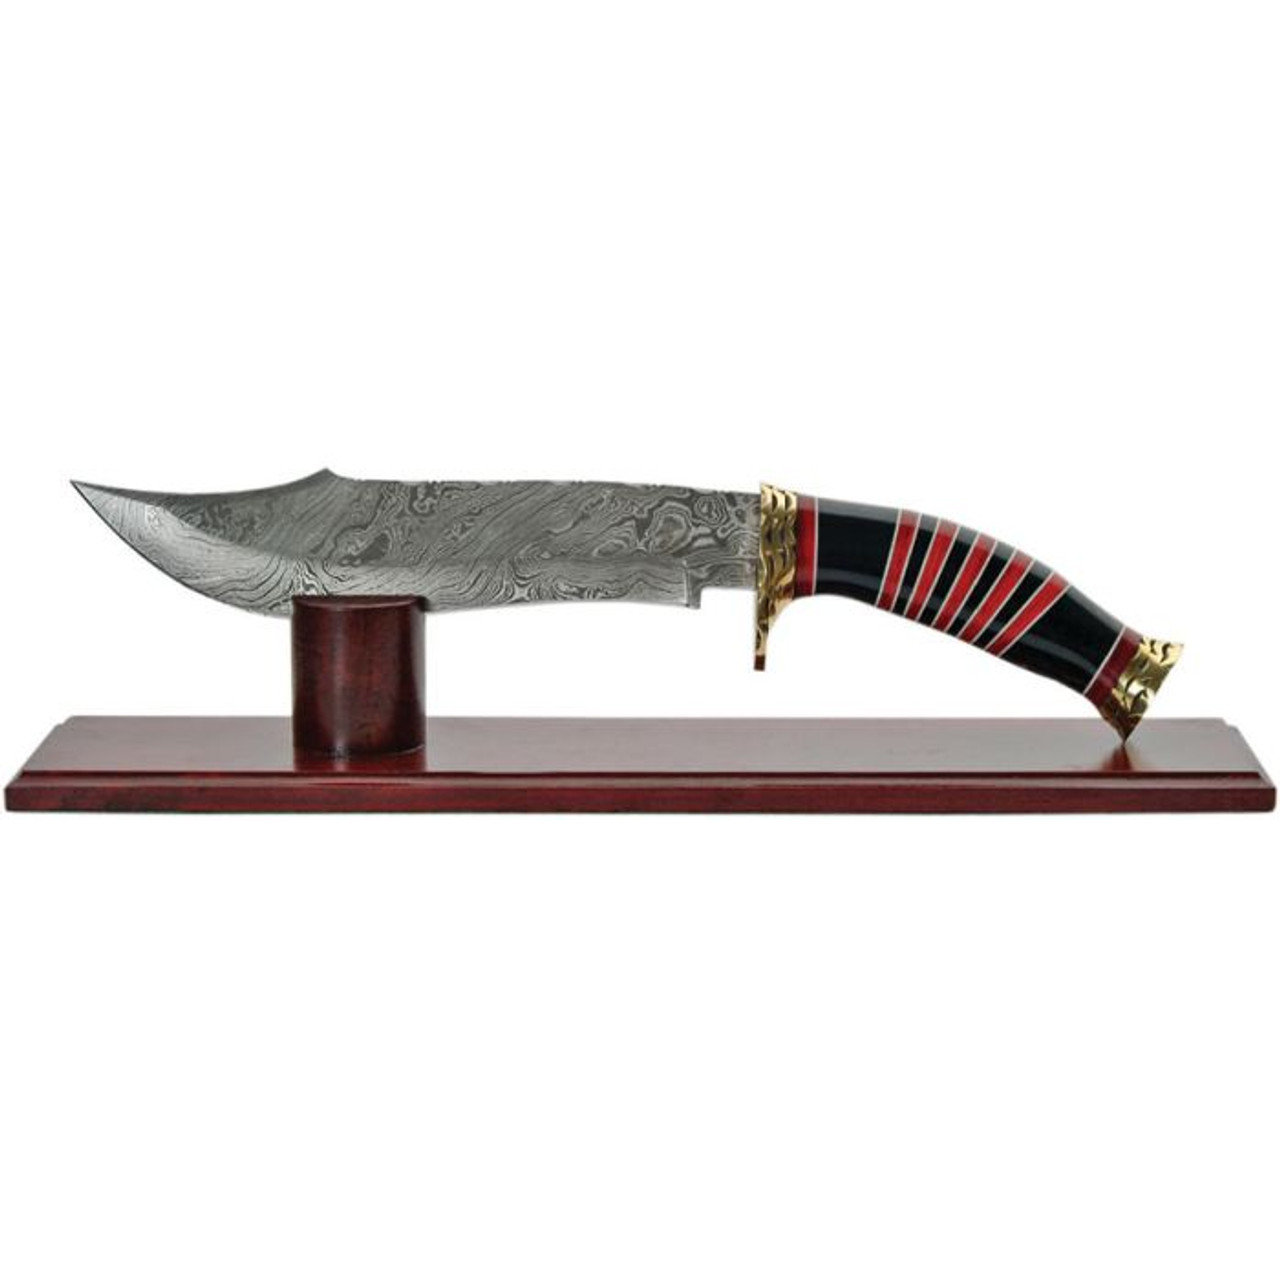 Damascus Knives Bowie (DM1056) 8.75" Damascus Clip Point Plain Blade, Black and Red Laminated Wood Handle with Brass Guard and Pommel, Brown Wood Tabletop Display Stand